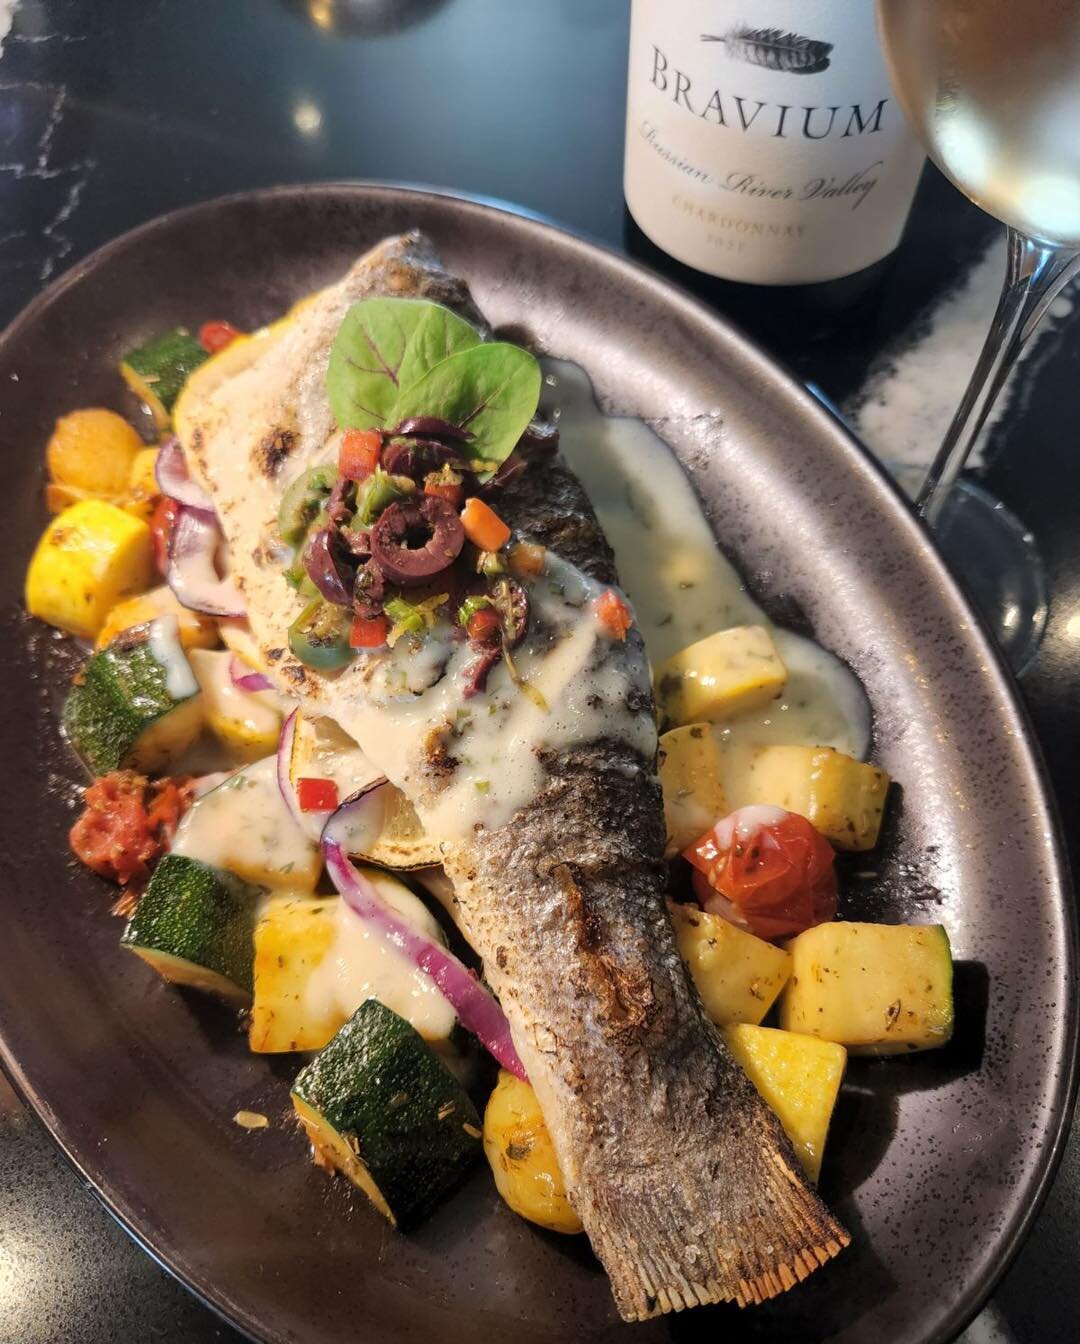 Weekend vibes loading now!!! 

👉🏼 Whole-roasted Branzino (also known as European Sea Bass) stuffed with lemon and herbs, over roasted summer vegetables, topped with lemon sauce and olive relish

🍷 Pictured with @braviumwines Chardonnay - cheers!!
